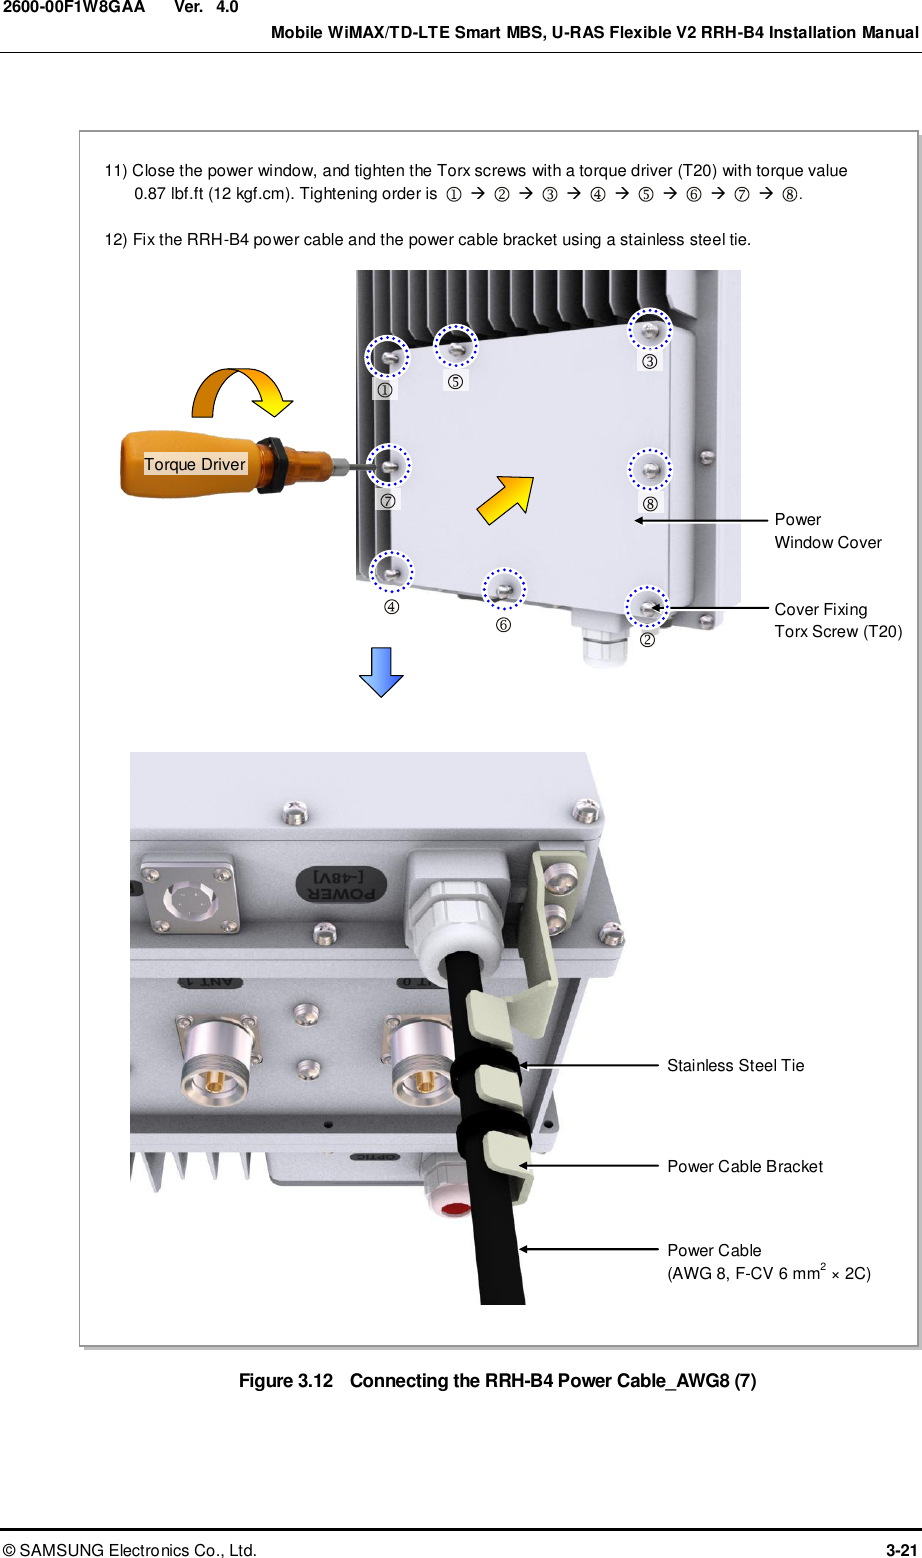  Ver.    Mobile WiMAX/TD-LTE Smart MBS, U-RAS Flexible V2 RRH-B4 Installation Manual ©  SAMSUNG Electronics Co., Ltd.  3-21 2600-00F1W8GAA 4.0  Figure 3.12  Connecting the RRH-B4 Power Cable_AWG8 (7) 11) Close the power window, and tighten the Torx screws with a torque driver (T20) with torque value 0.87 lbf.ft (12 kgf.cm). Tightening order is                             .  12) Fix the RRH-B4 power cable and the power cable bracket using a stainless steel tie. Stainless Steel Tie Power Cable (AWG 8, F-CV 6 mm2 × 2C) Power Cable Bracket  Cover Fixing Torx Screw (T20) Power   Window Cover         Torque Driver 